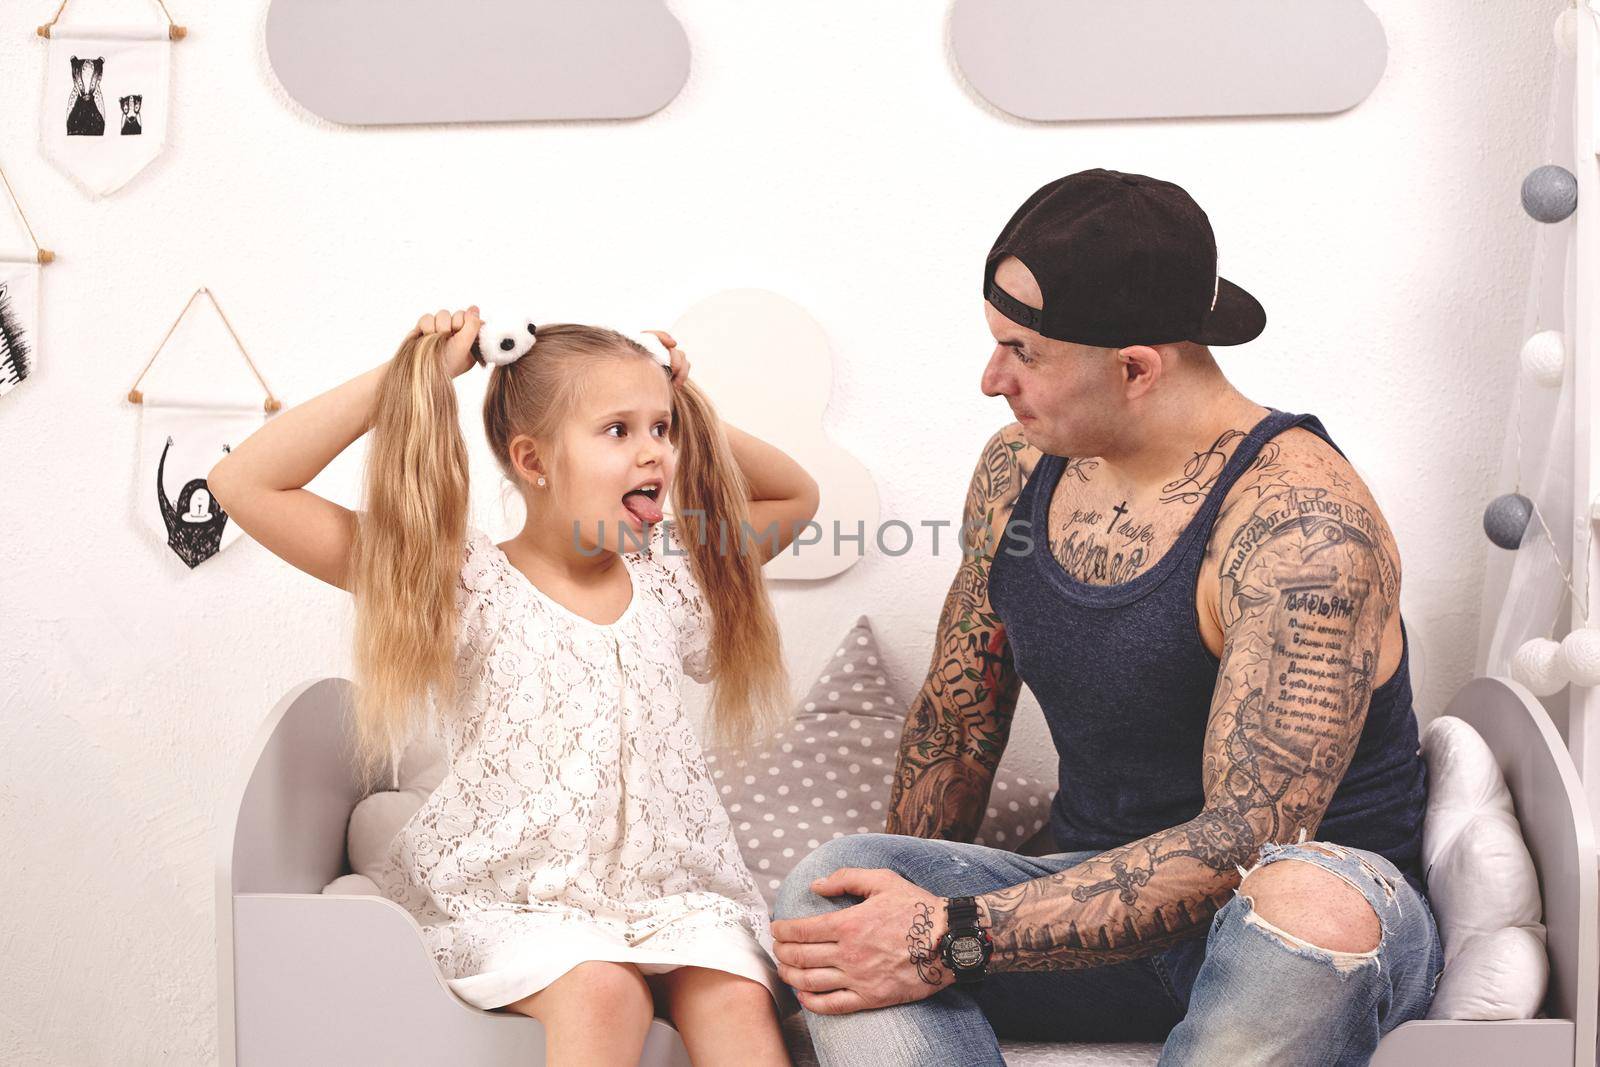 Funny time Tattoed father in a cap and his child are playing at home. Dad is doing his daughter's hair in her bedroom. They are looking at each other and she is showing her tongue. Family holiday and togetherness.